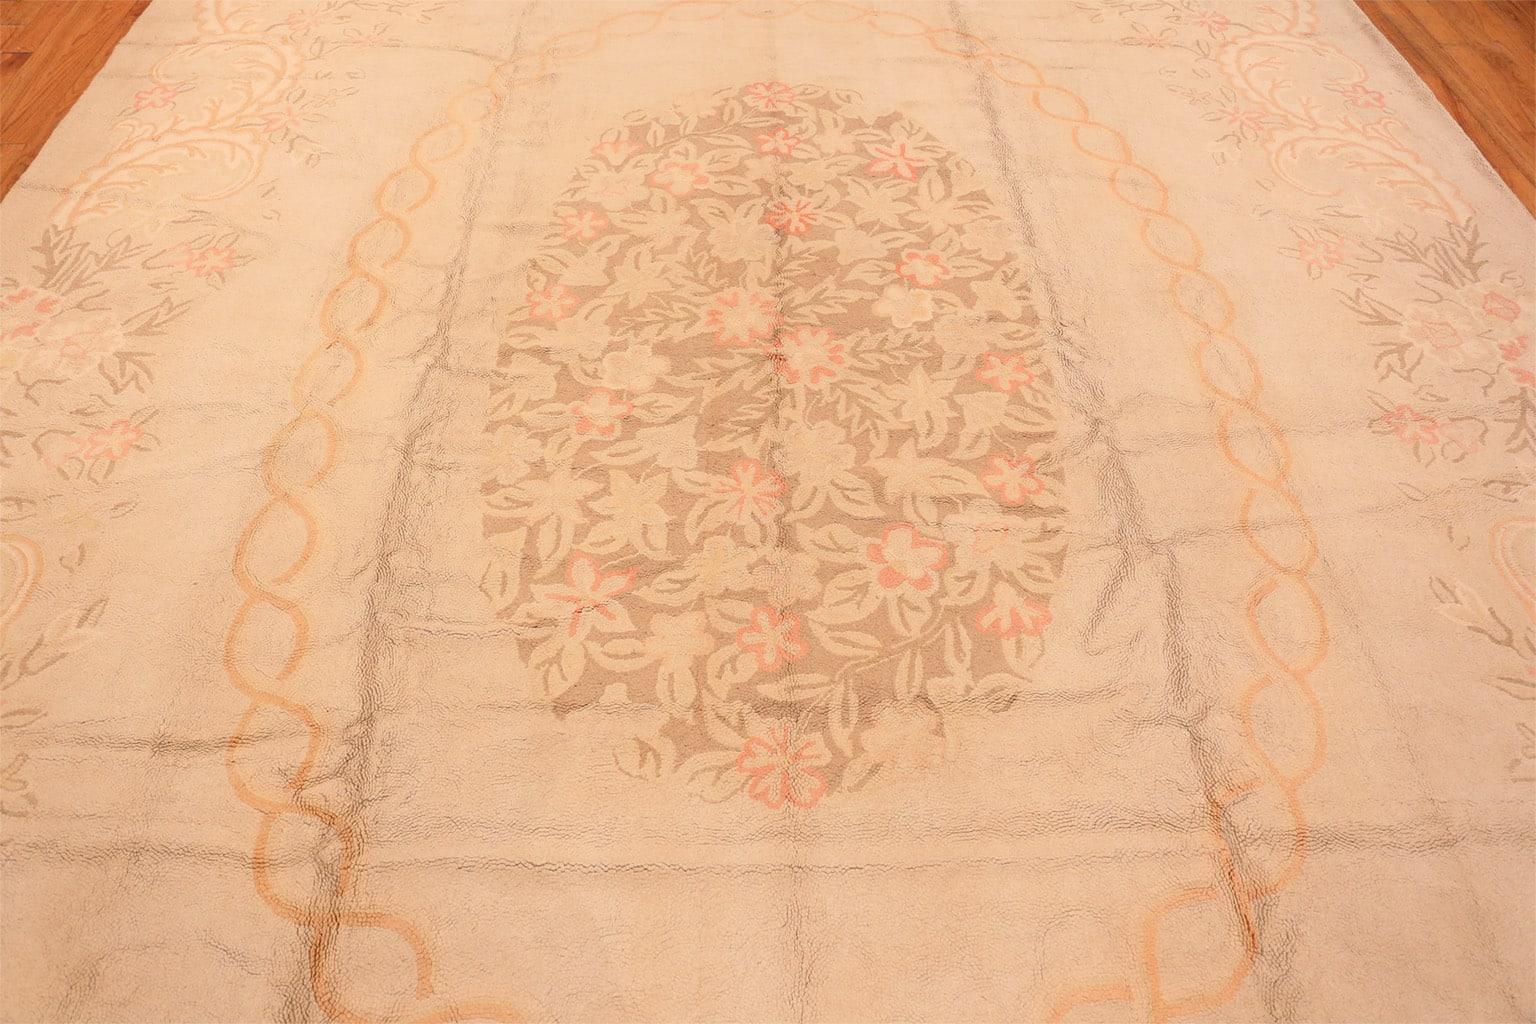 Antique America Hooked Rug that Was based Off Of A French Aubusson Carpet Design, Country of Origin: America, Circa Date: Early 20th Century – While the technique and somewhat quaint drawing of this outstanding antique hooked rug betray the